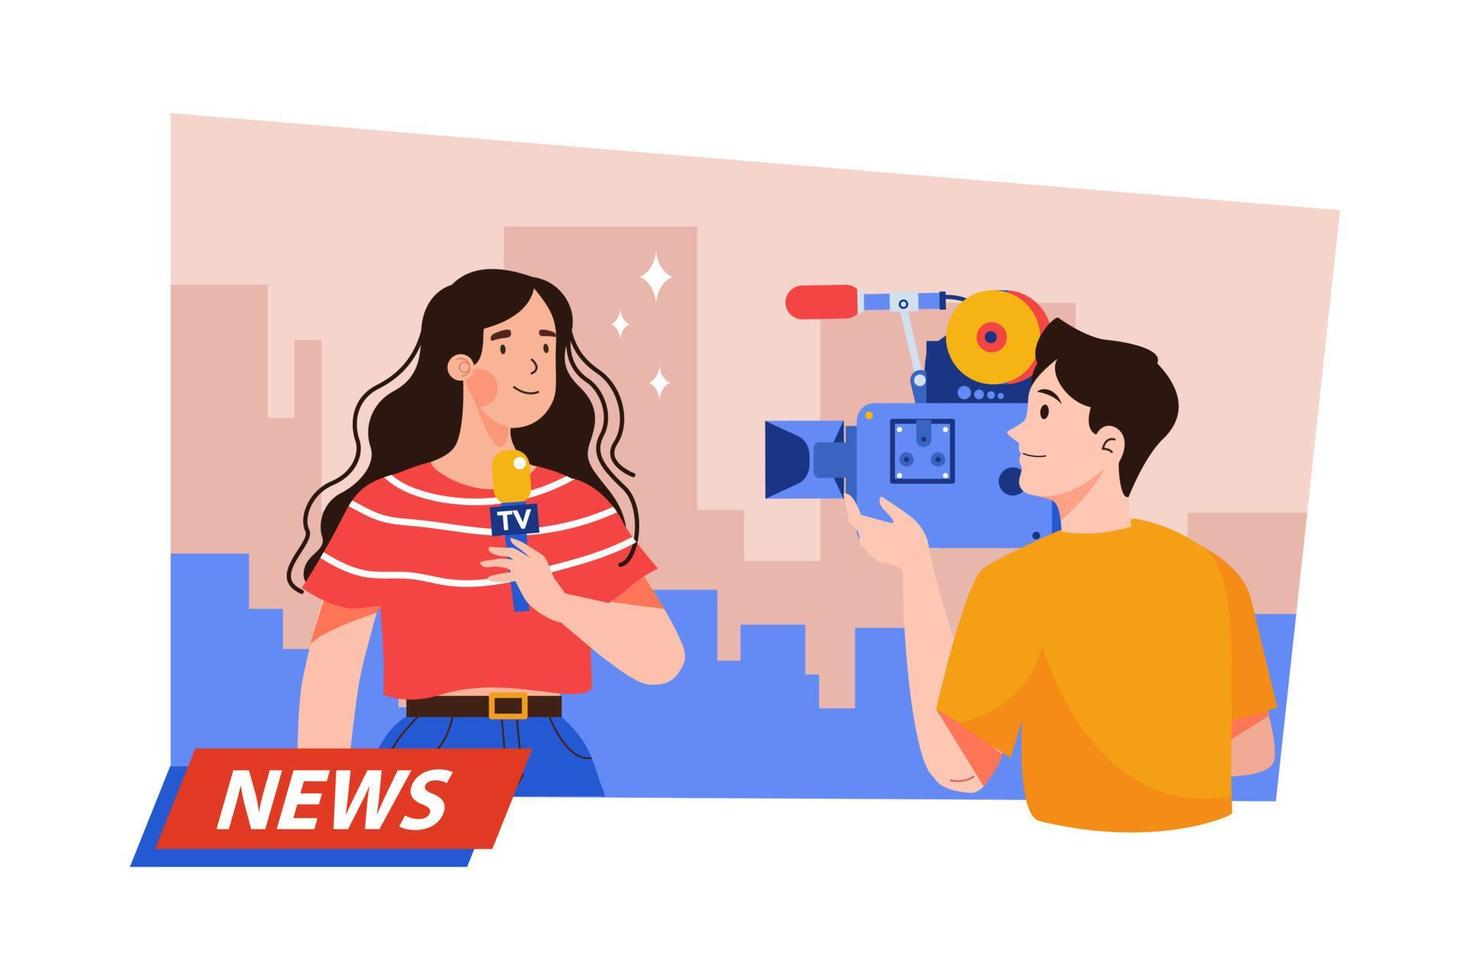 News room, television broadcasting of live streaming reportage Illustration concept on white background vector